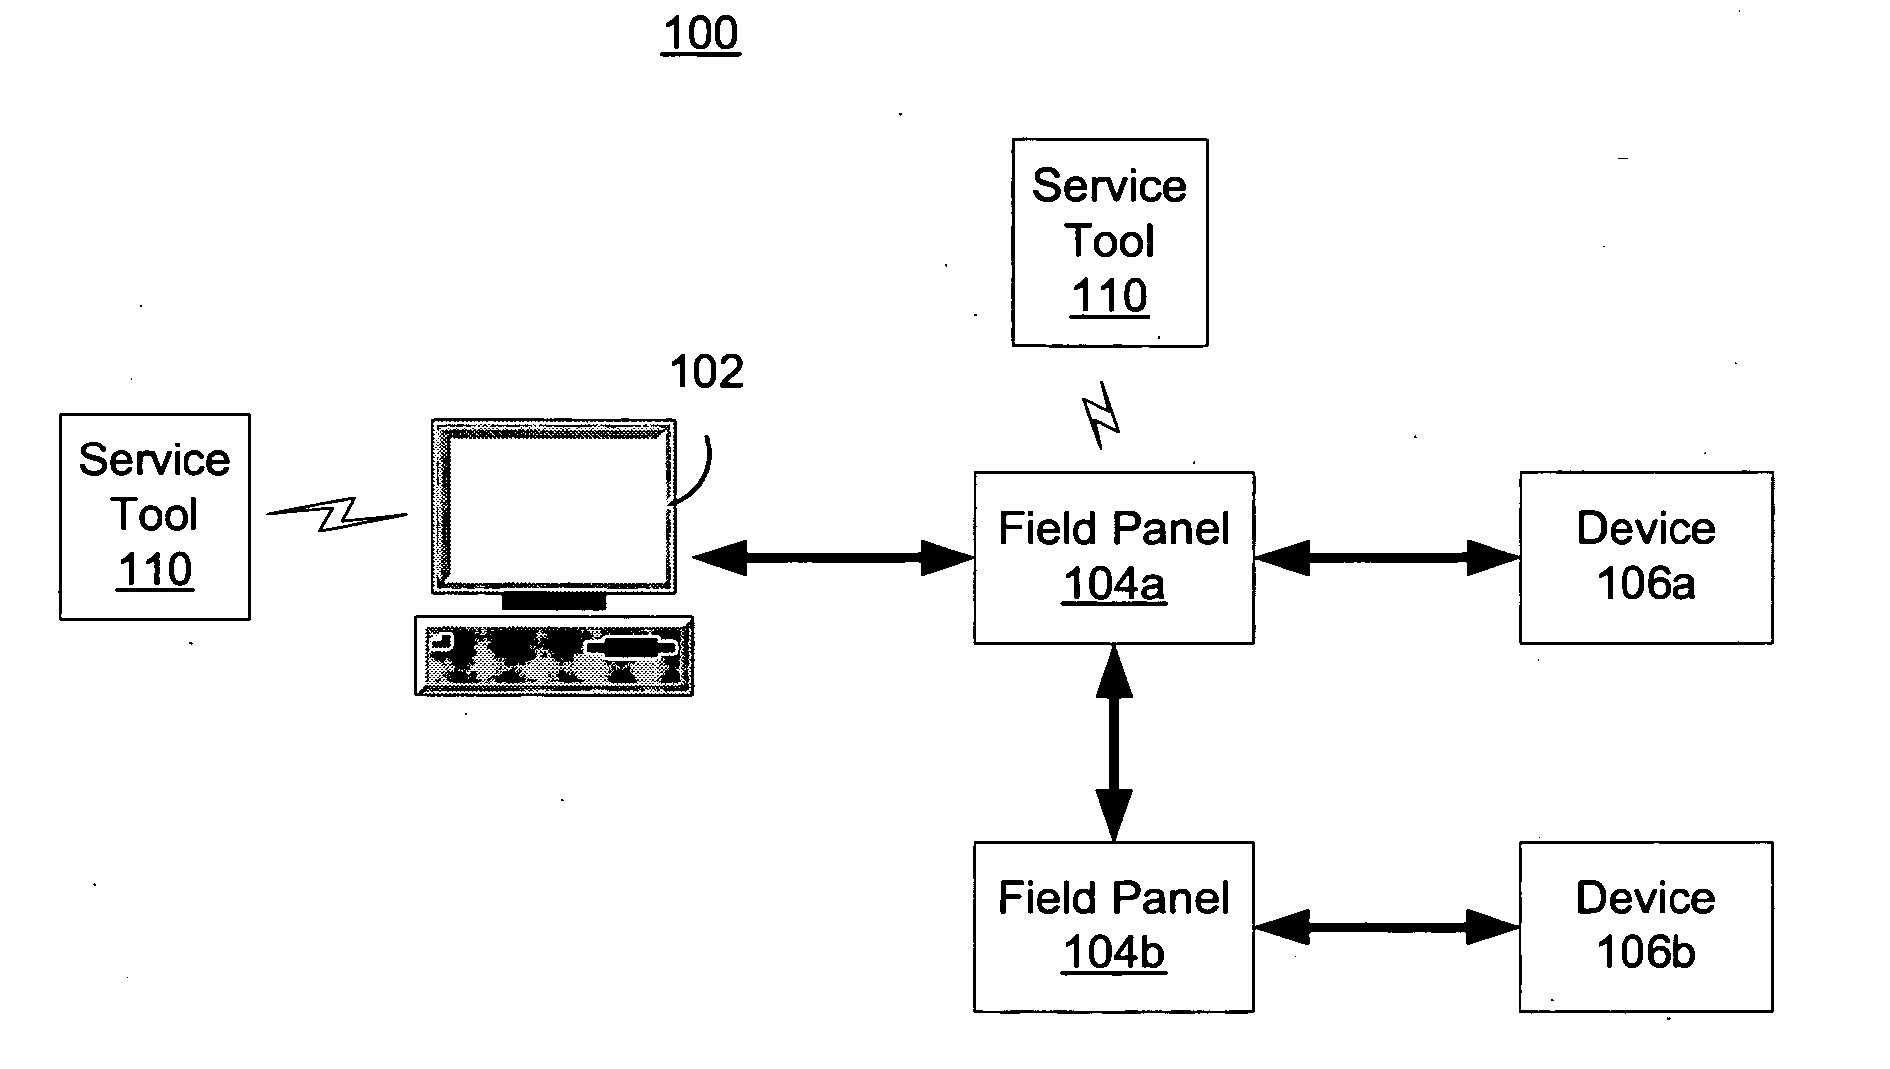 Wireless service tool for automated protection systems